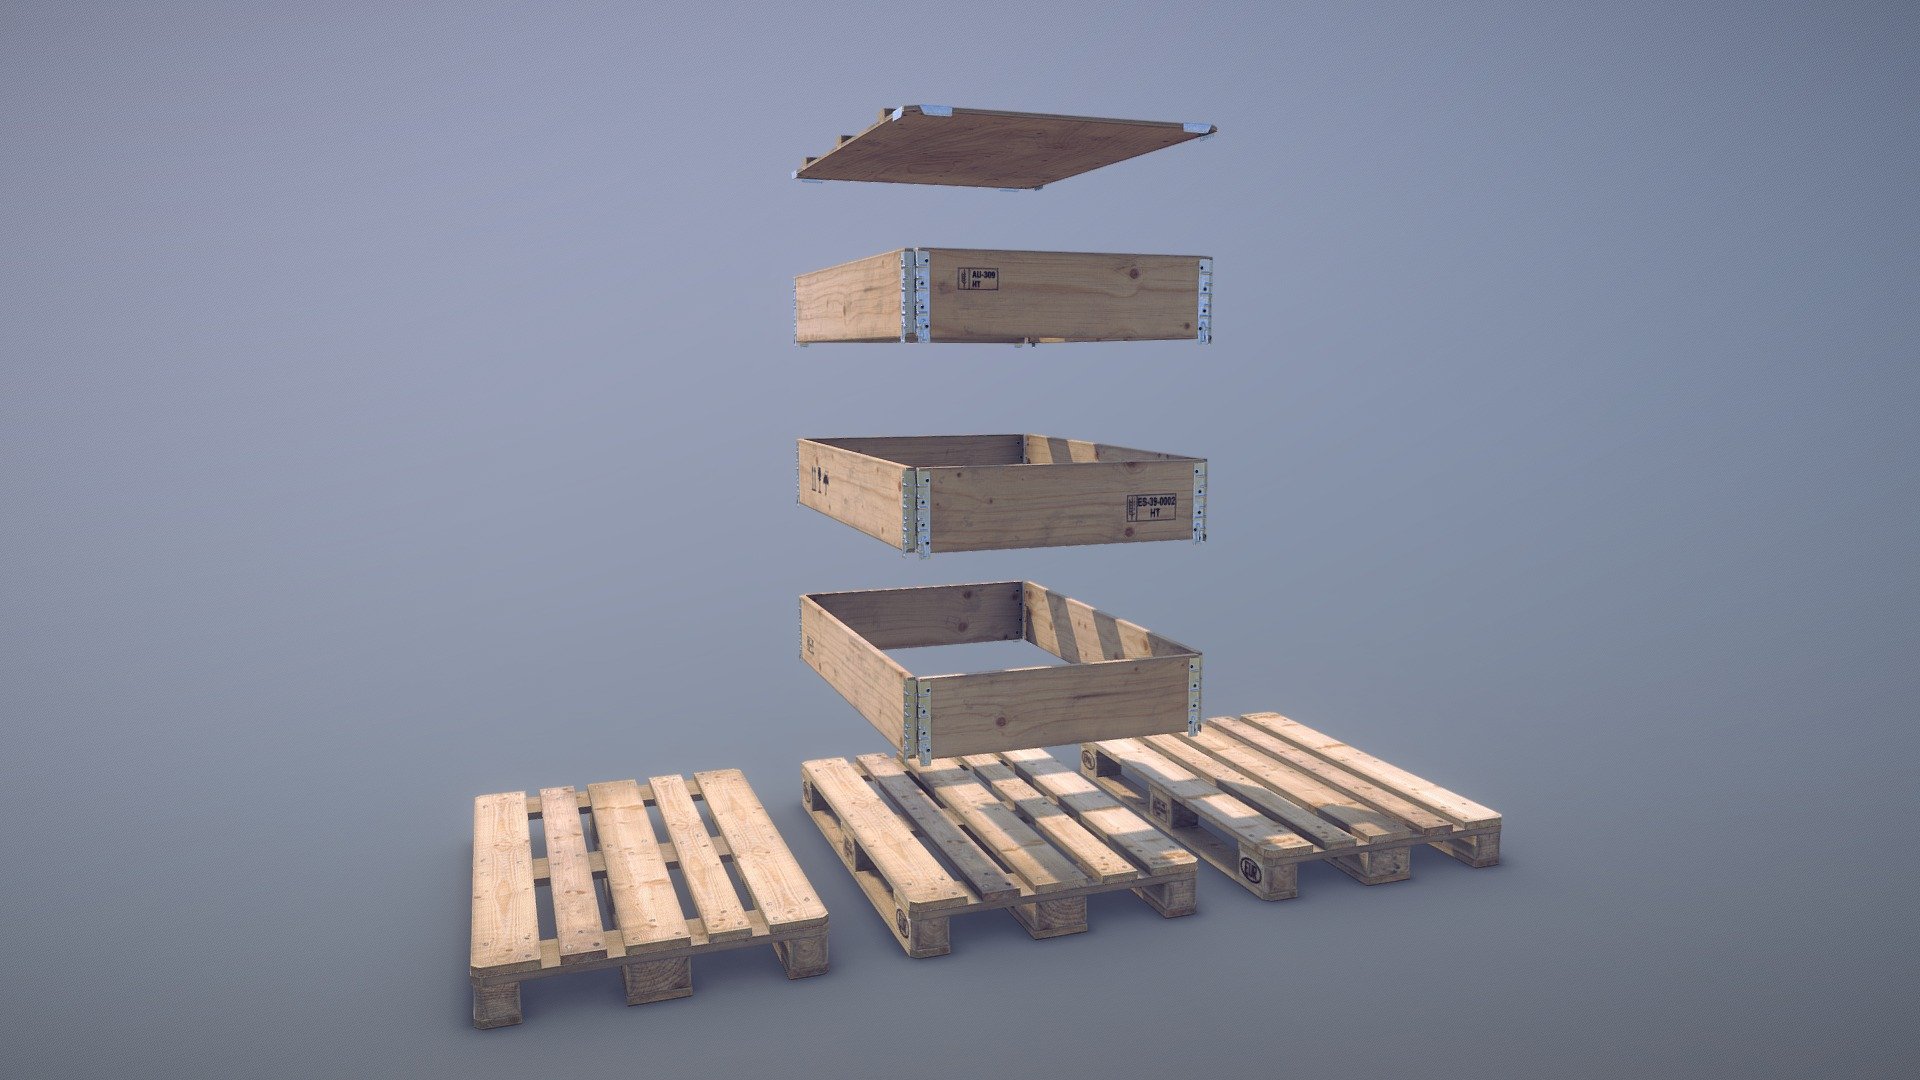 Cargo Wood Pallets Collars Cover EUR EPAL vr.1




LOD0 - (triangles 1718) / (points 1144)

LOD1 - (triangles 656) / (points 553)

LOD2 - (triangles 136) / (points 192)

Low-poly 3D model Cargo Wood Pallets Collars Cover EUR EPAL with LODs 
(three variations for Pallets) +  (three variations for Pallet Collars) + (Cover)  (size 1200mm - 800mm - 145mm)




Textures for PBR-Specular and PBR-Metallic shader (Albedo, Specular, Gloss, Roughness, Metallic, AmbietOcclusion, NormalMap) they may be used with Unity3D, Unreal Engine. size 4096x4096

Contains 3 LODs

Objects have adequate names and spaced pivots

See model on the Sketchfab fullscreen mode and HD quality

All pictures (previews) REALTIME rendering 

If you have questions about my models or need any kind of help, feel free to contact me and i'll do my best to help you 3d model